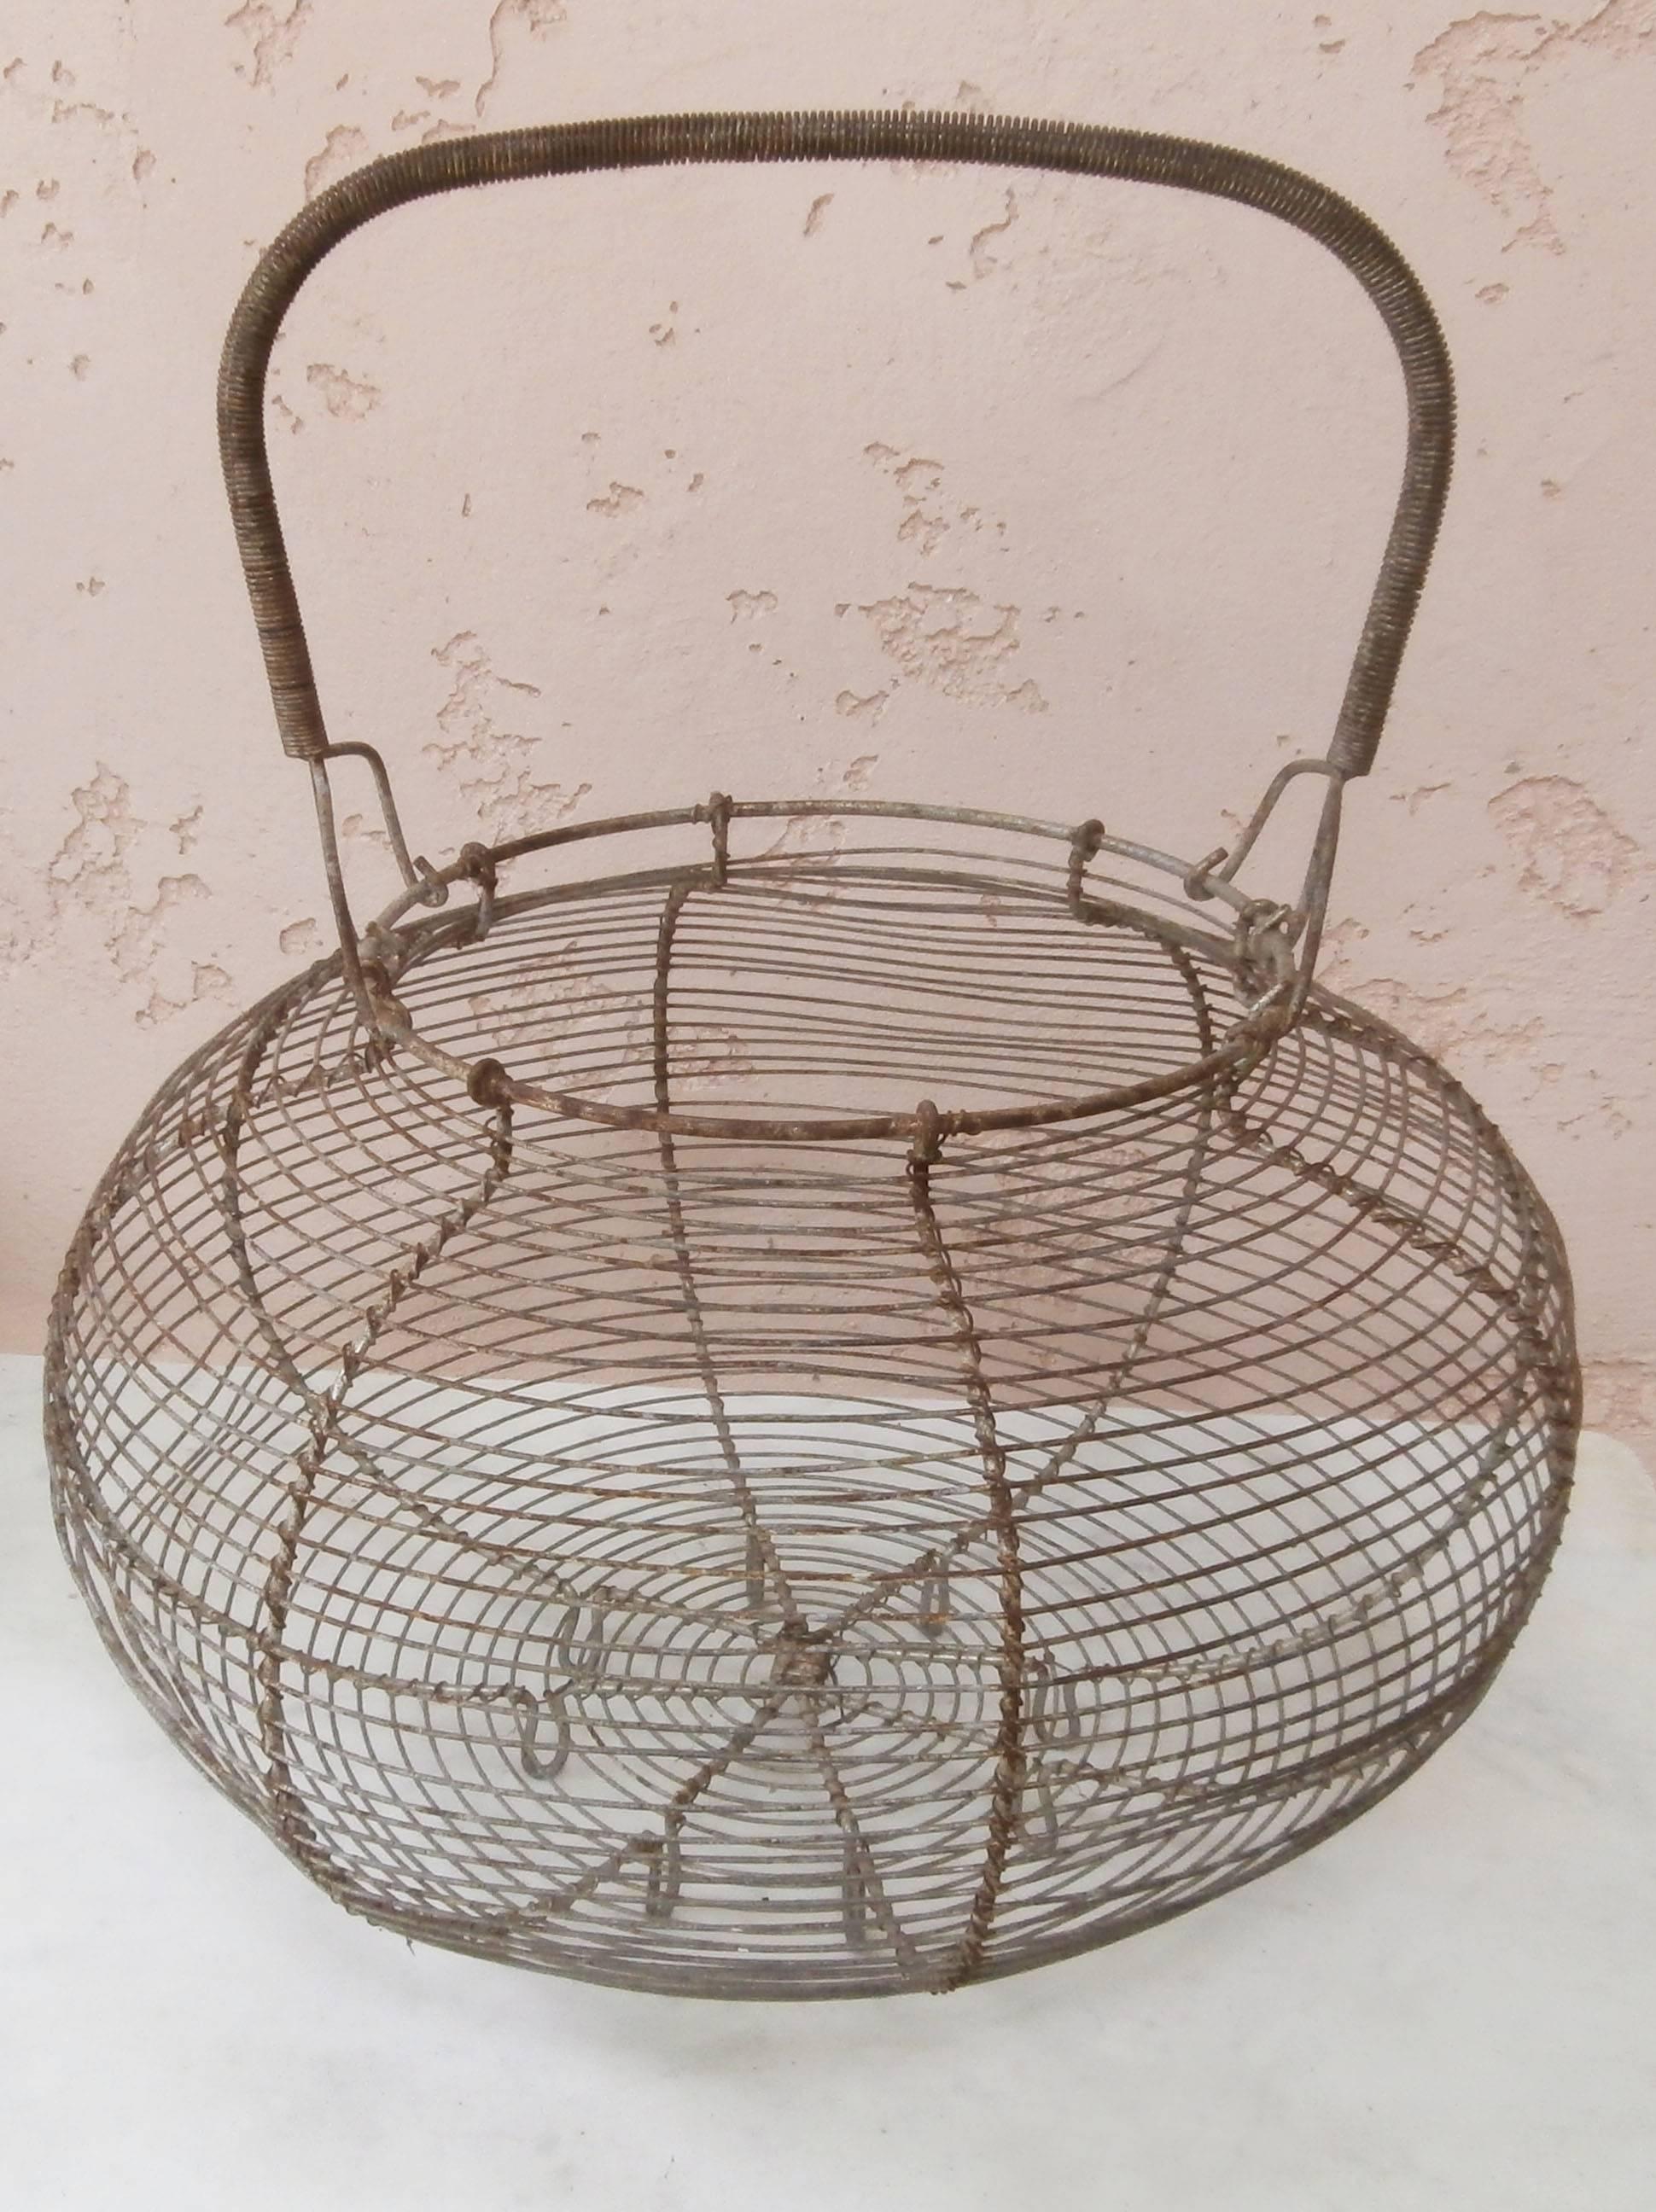 A very large French wire basket salad, circa 1940.